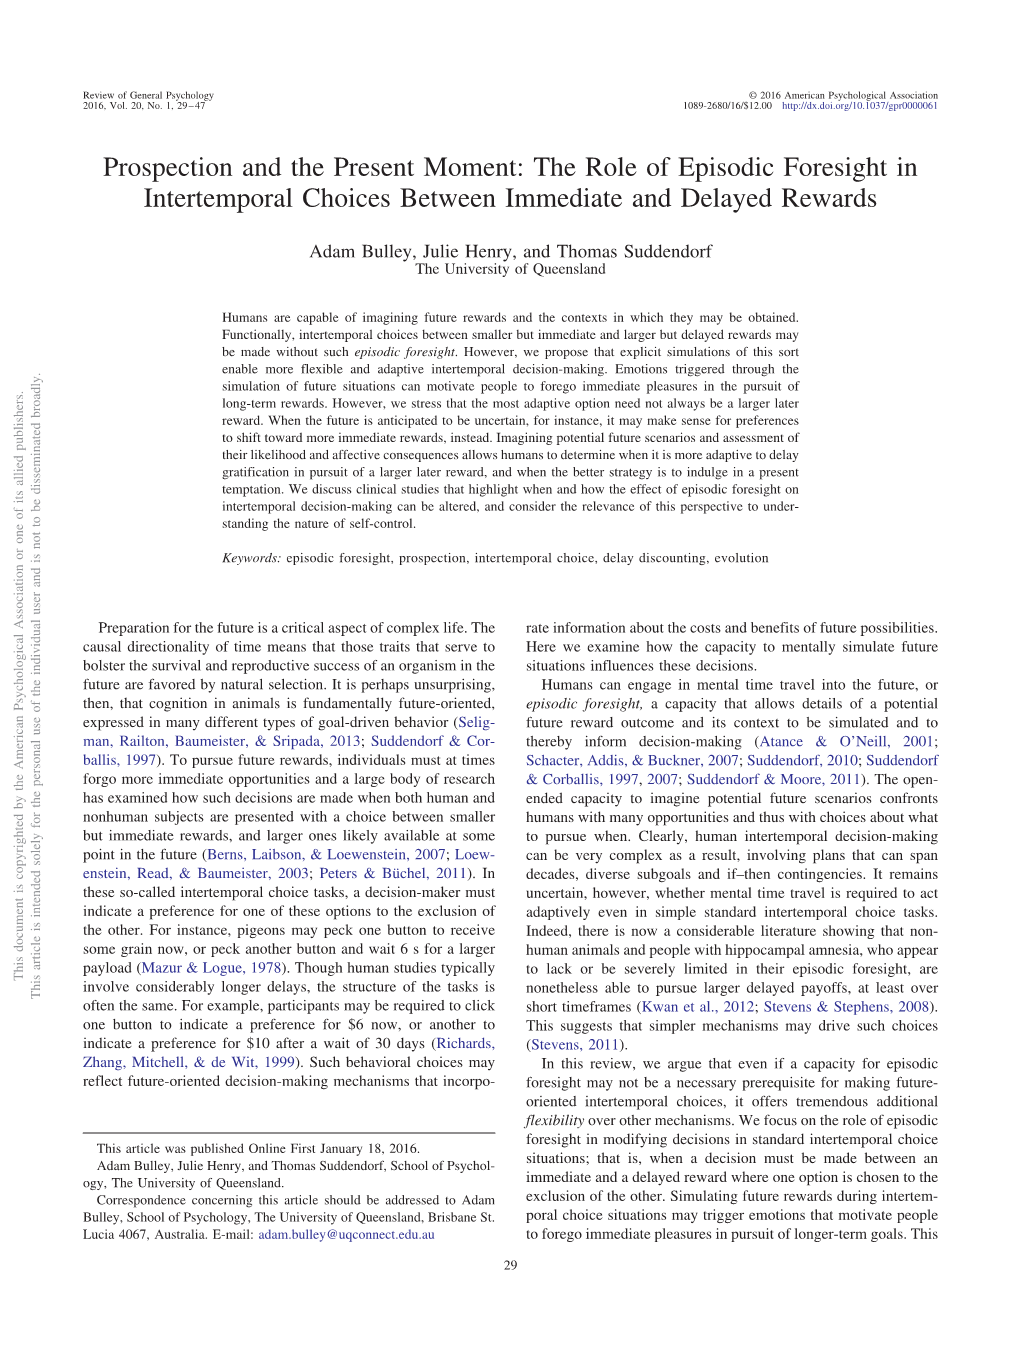 The Role of Episodic Foresight in Intertemporal Choices Between Immediate and Delayed Rewards